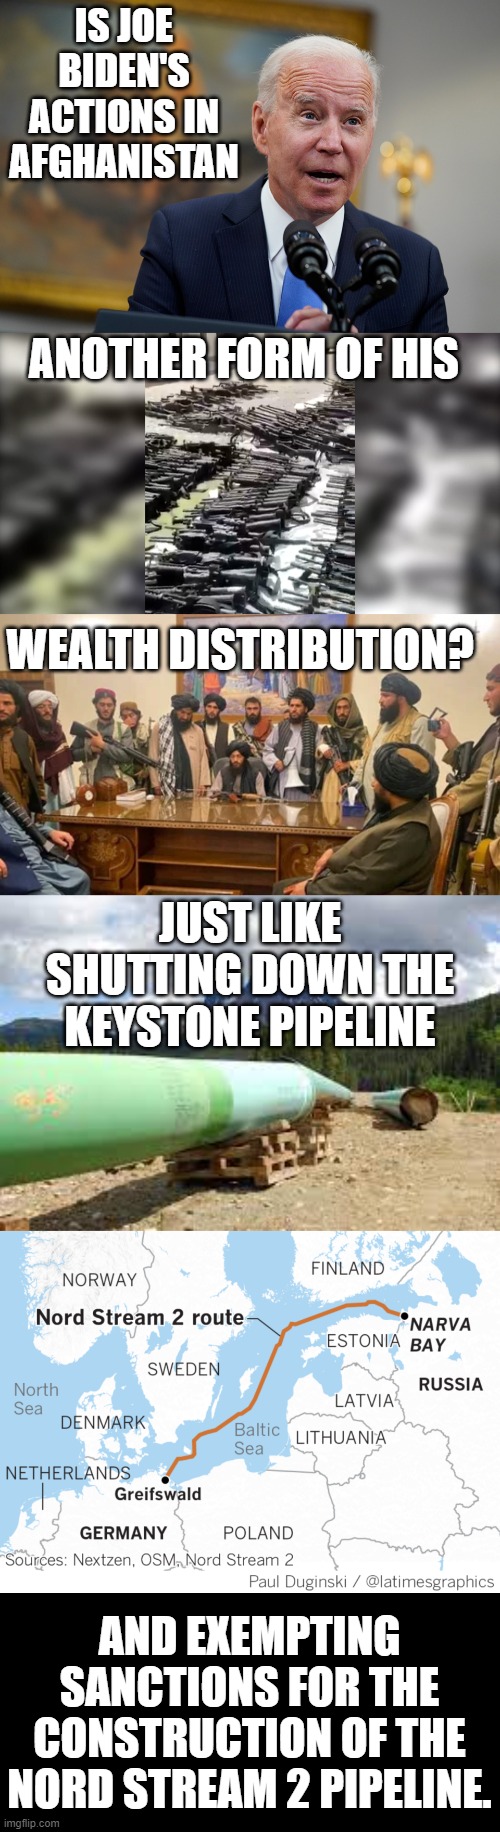 I Have To Ask... | IS JOE BIDEN'S ACTIONS IN AFGHANISTAN; ANOTHER FORM OF HIS; WEALTH DISTRIBUTION? JUST LIKE SHUTTING DOWN THE KEYSTONE PIPELINE; AND EXEMPTING SANCTIONS FOR THE CONSTRUCTION OF THE NORD STREAM 2 PIPELINE. | image tagged in memes,politics,joe biden,wealth,distribution,taliban | made w/ Imgflip meme maker